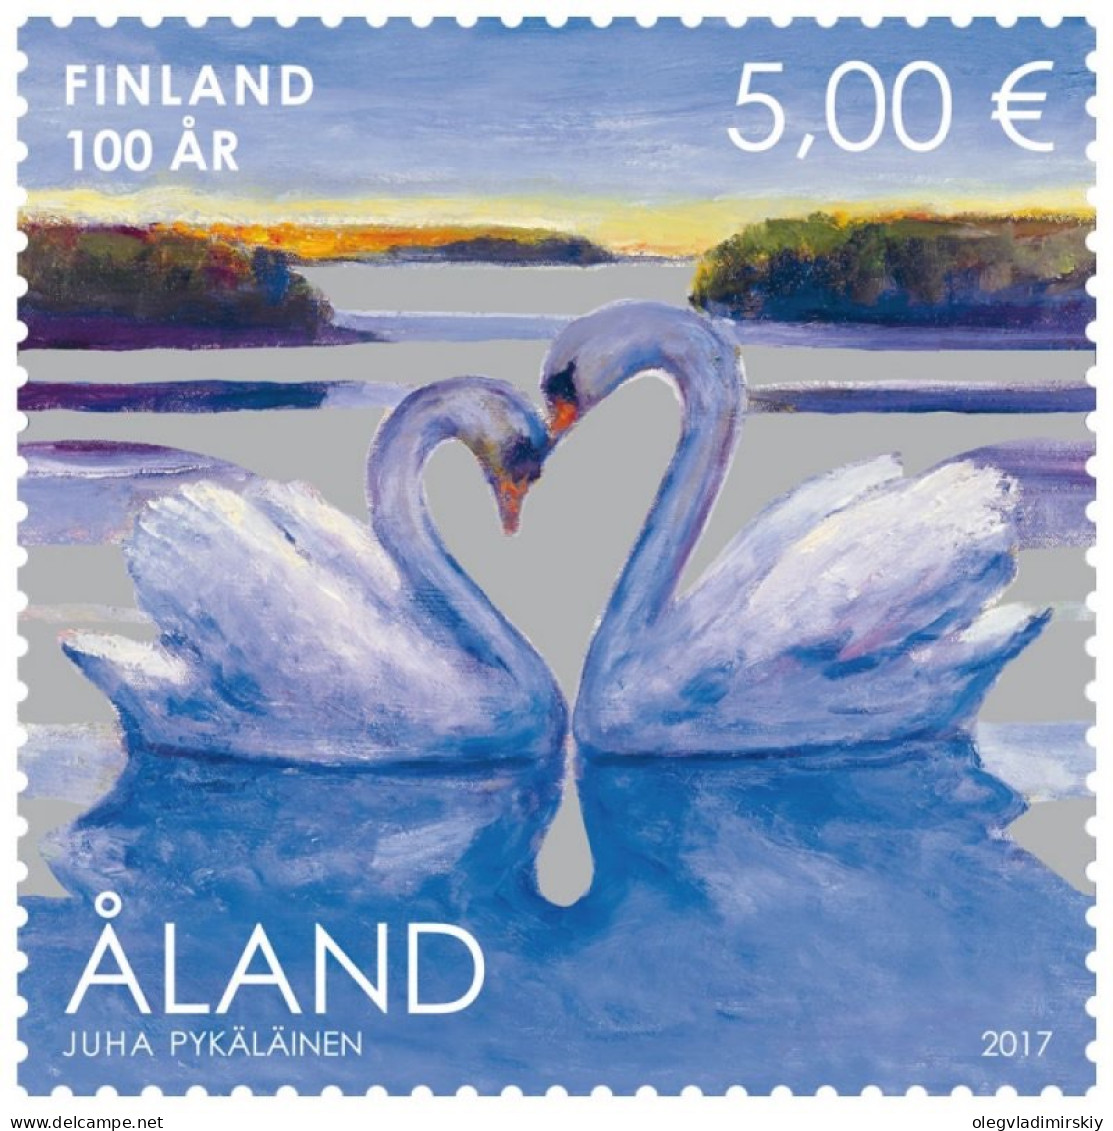 Aland Islands Åland Finland 2017 Swans Finnish Independence 100 Ann Stamp Mint - Unused Stamps